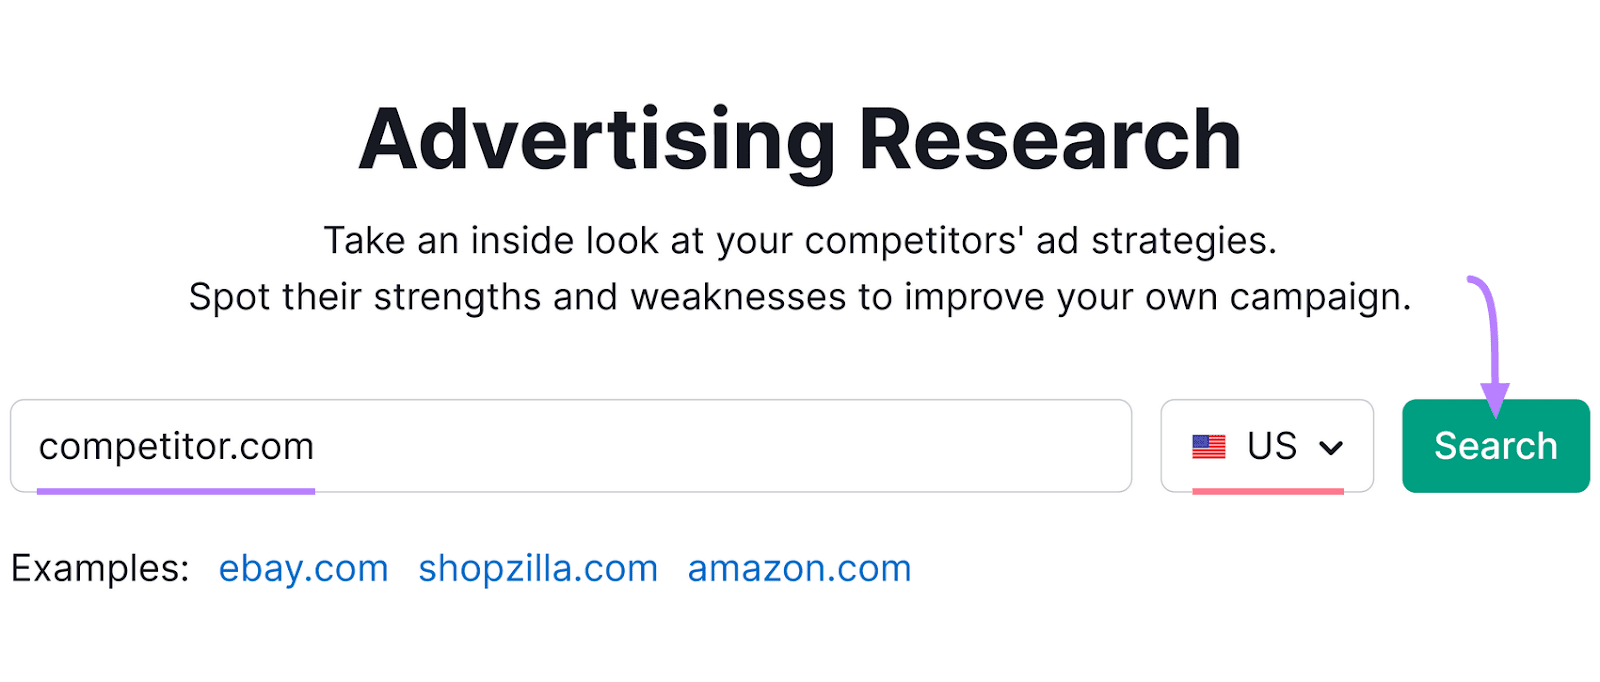 Advertising Research tool interface with a search bar, country selection dropdown, and a highlighted "Search" button.